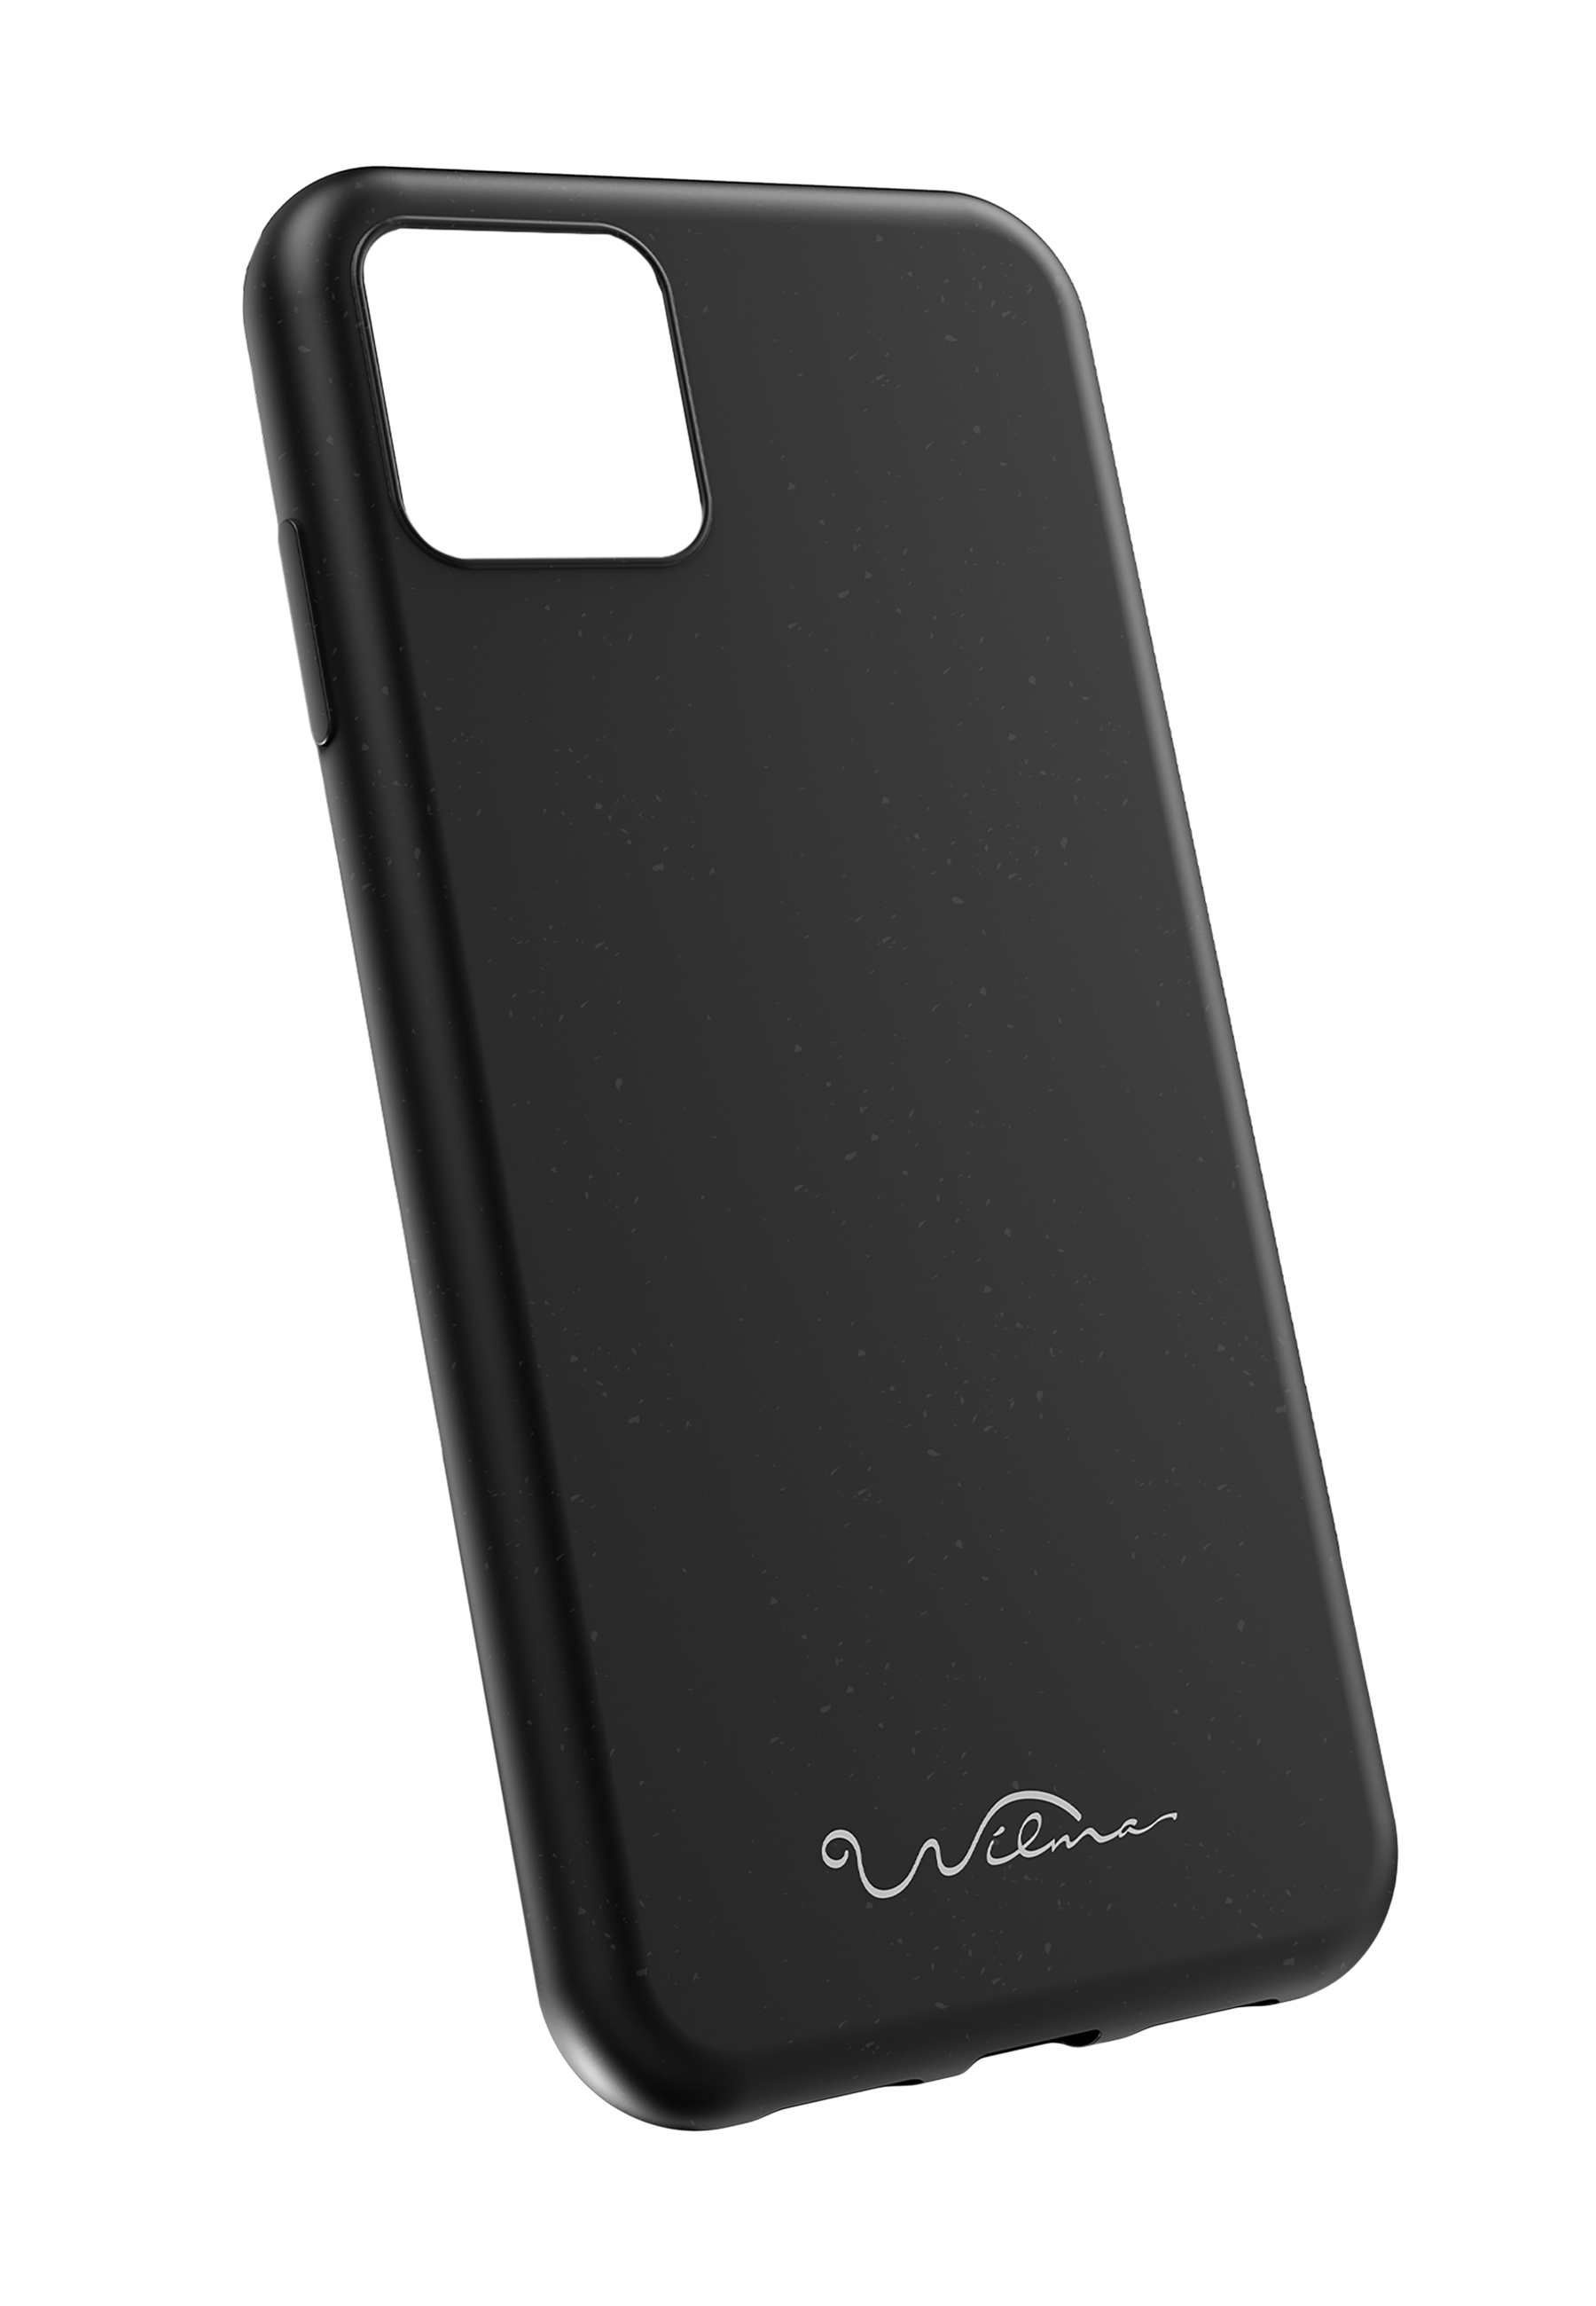 BY Apple, IP11R, 11, FASHION WILMA Backcover, ECO black iPhone